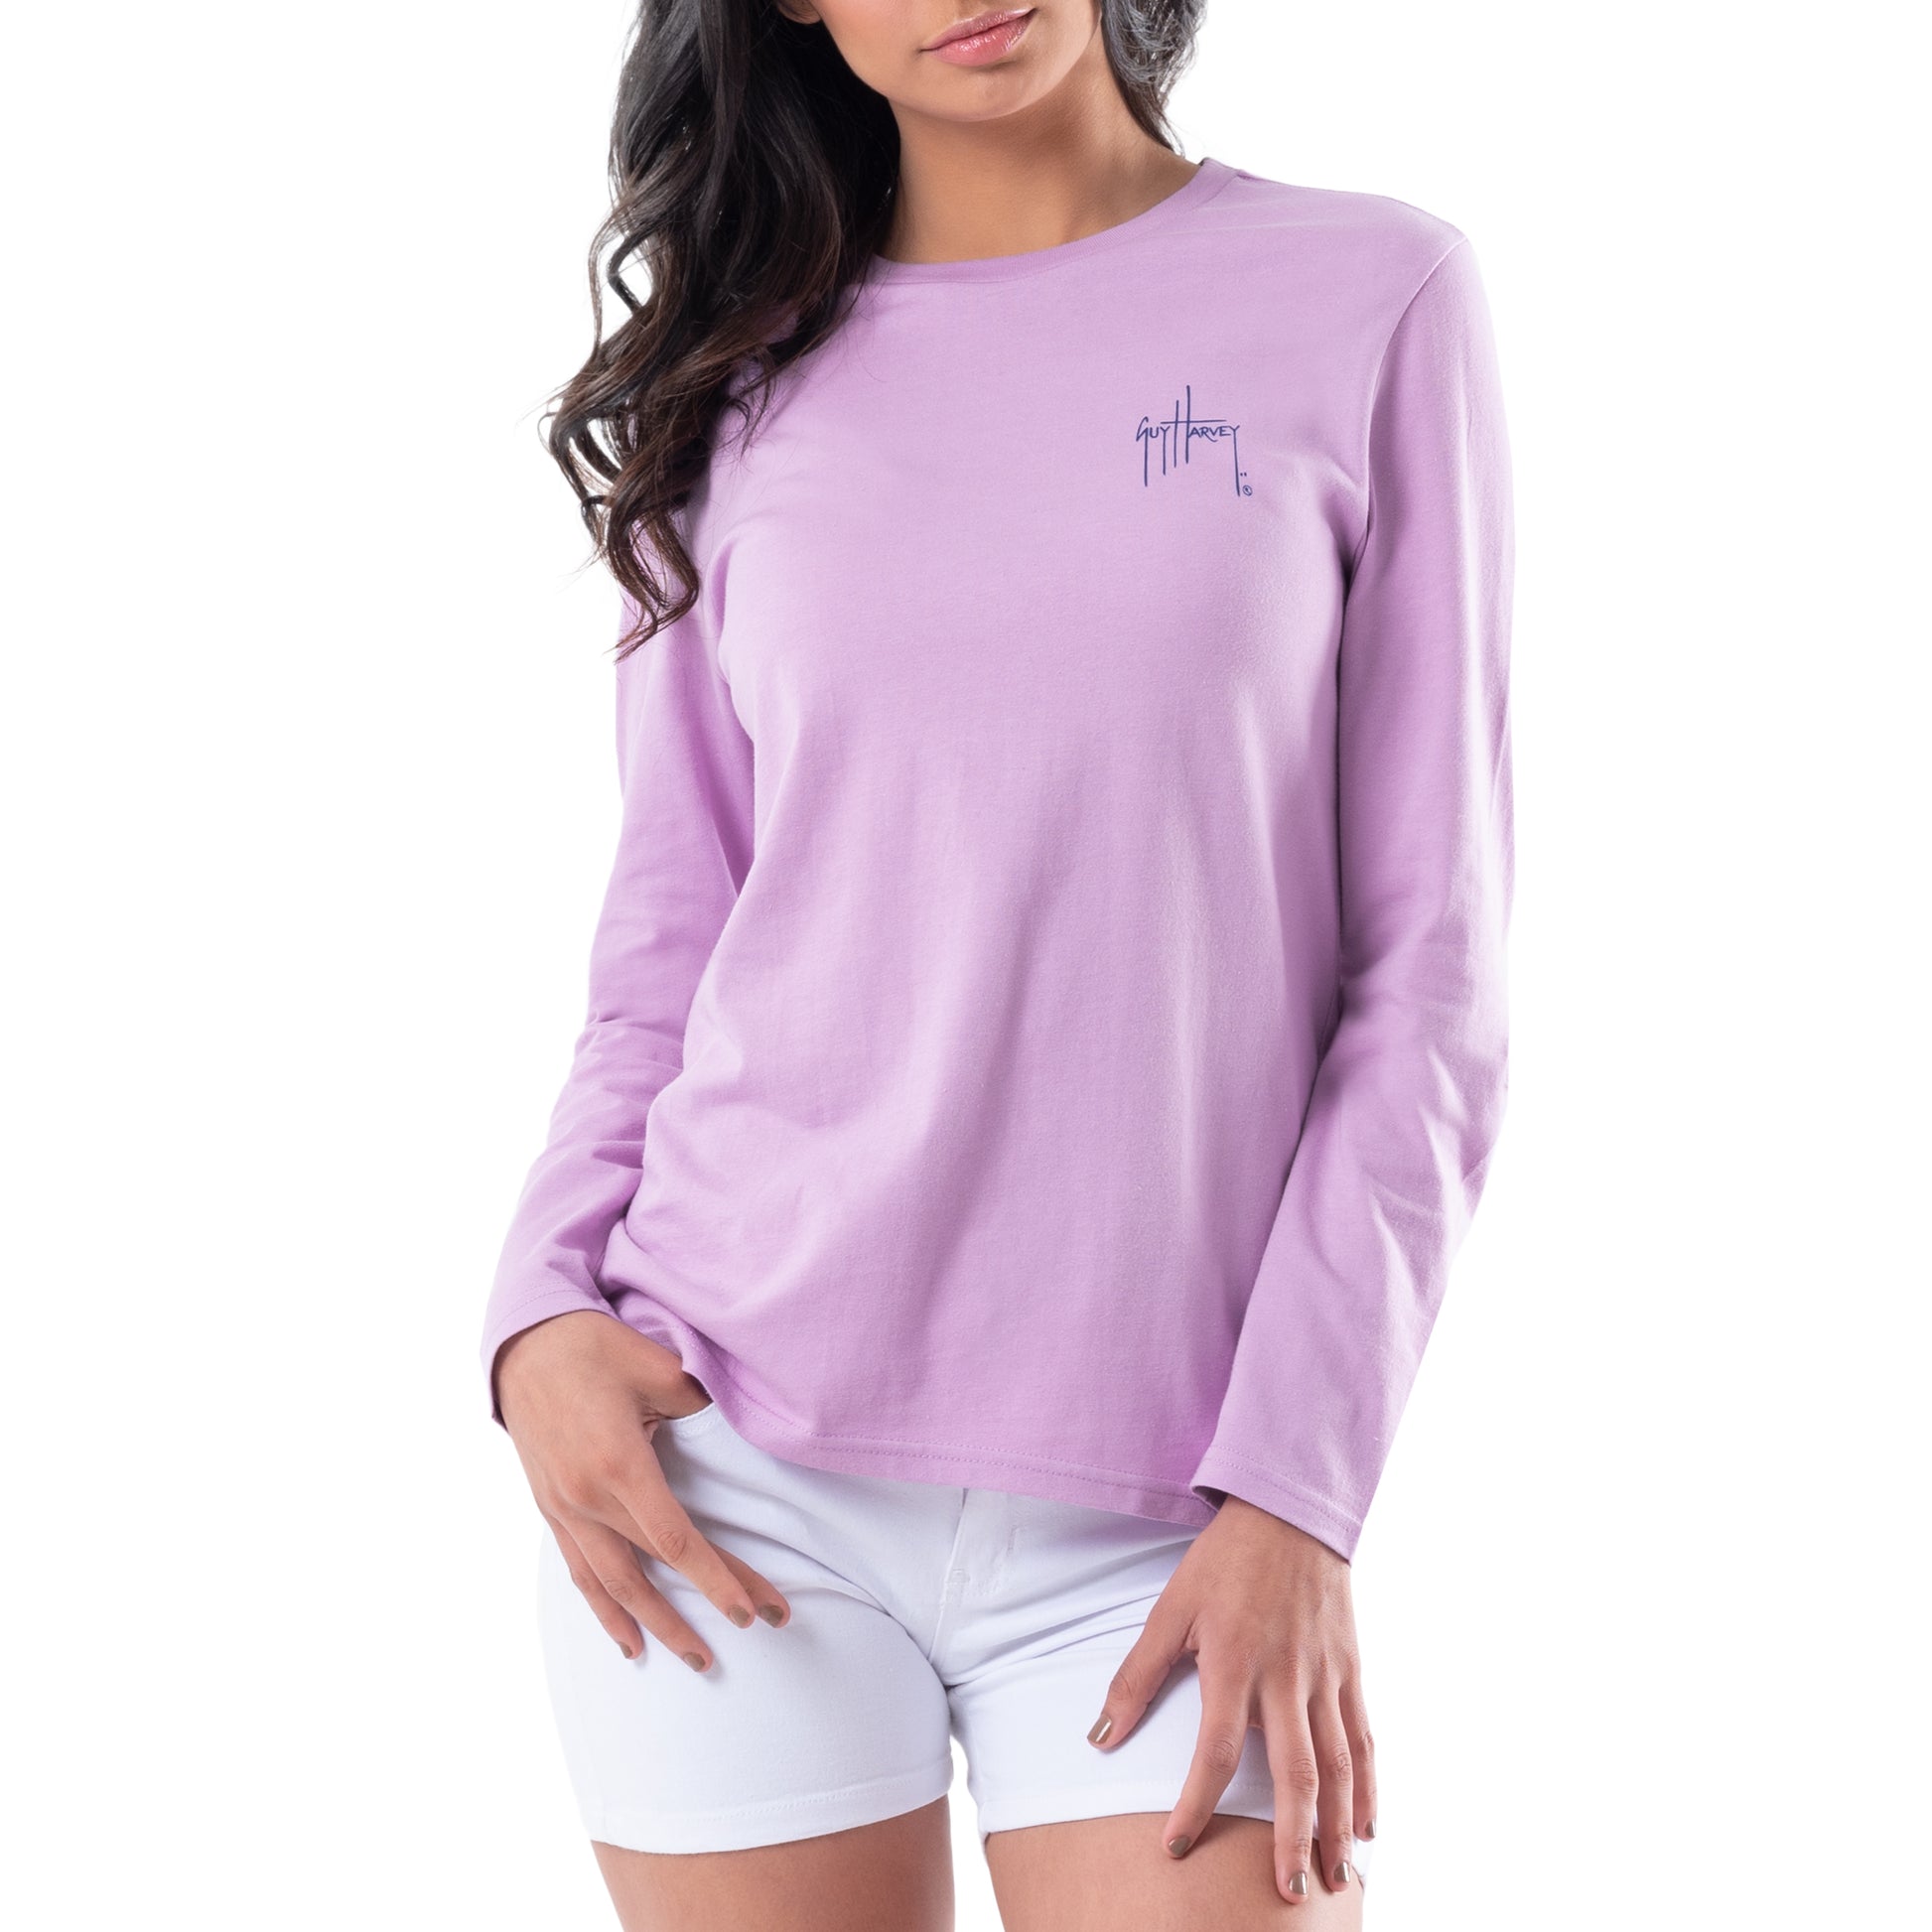 Ladies Southern Charm Long Sleeve Crew Neck T-Shirt View 2